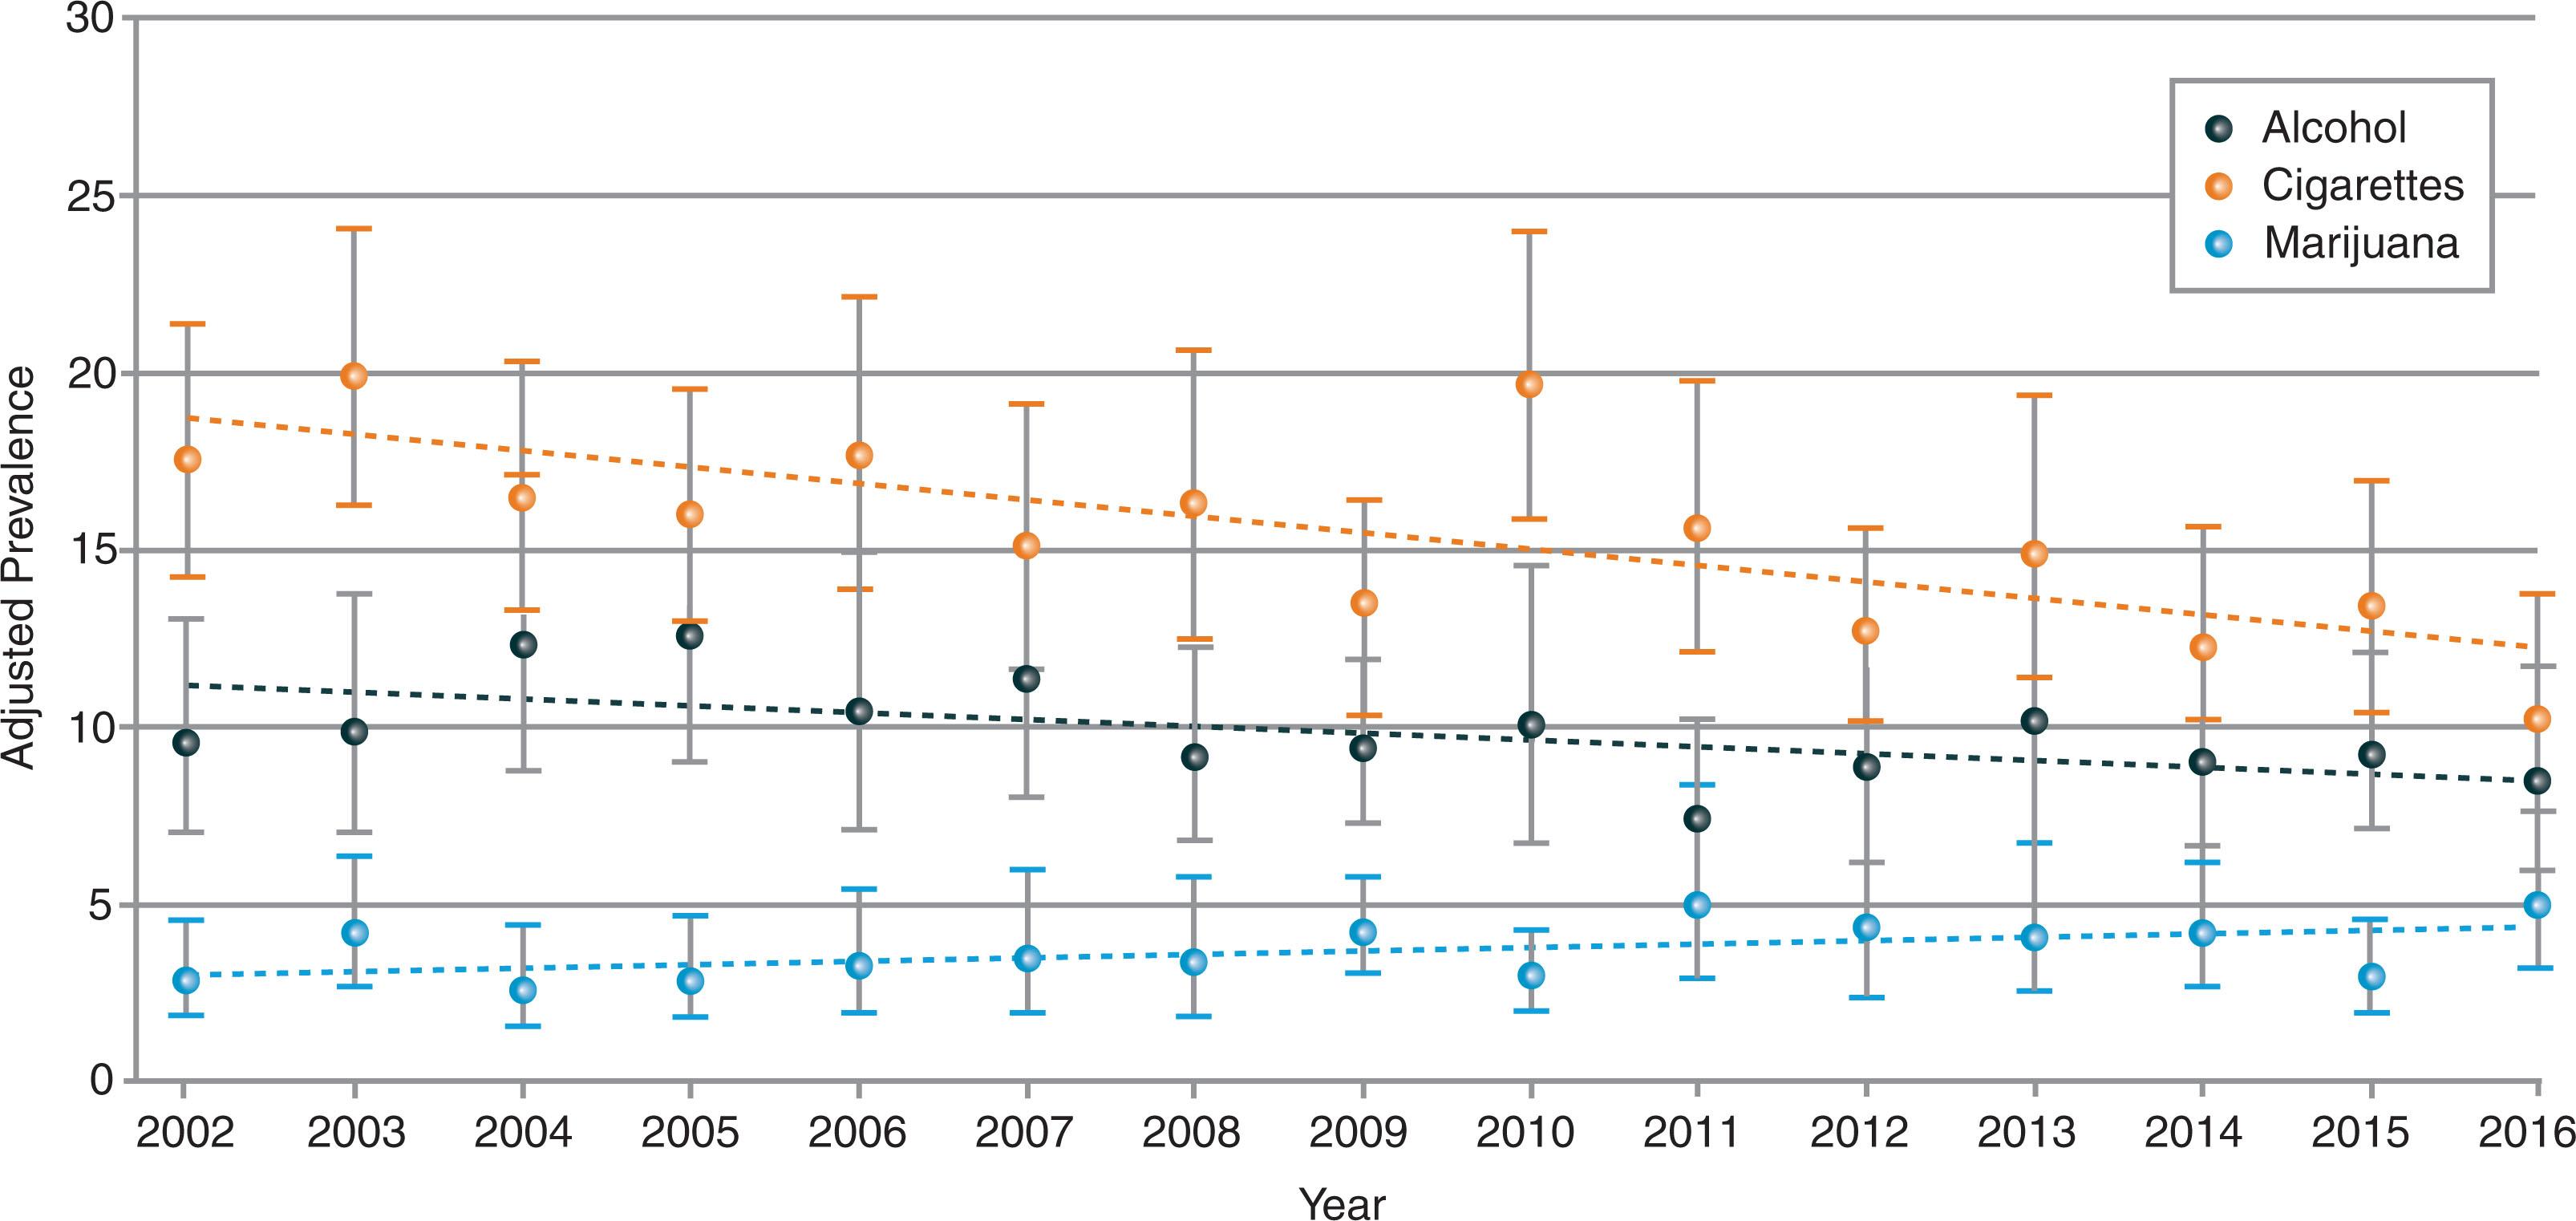 Fig. 11.1, Alcohol, cigarettes, and cannabis use in pregnancy (2002–2016). Derived from a 2019 publication, this figure demonstrates contemporary trends in the use of alcohol, tobacco, and cannabis during pregnancy.